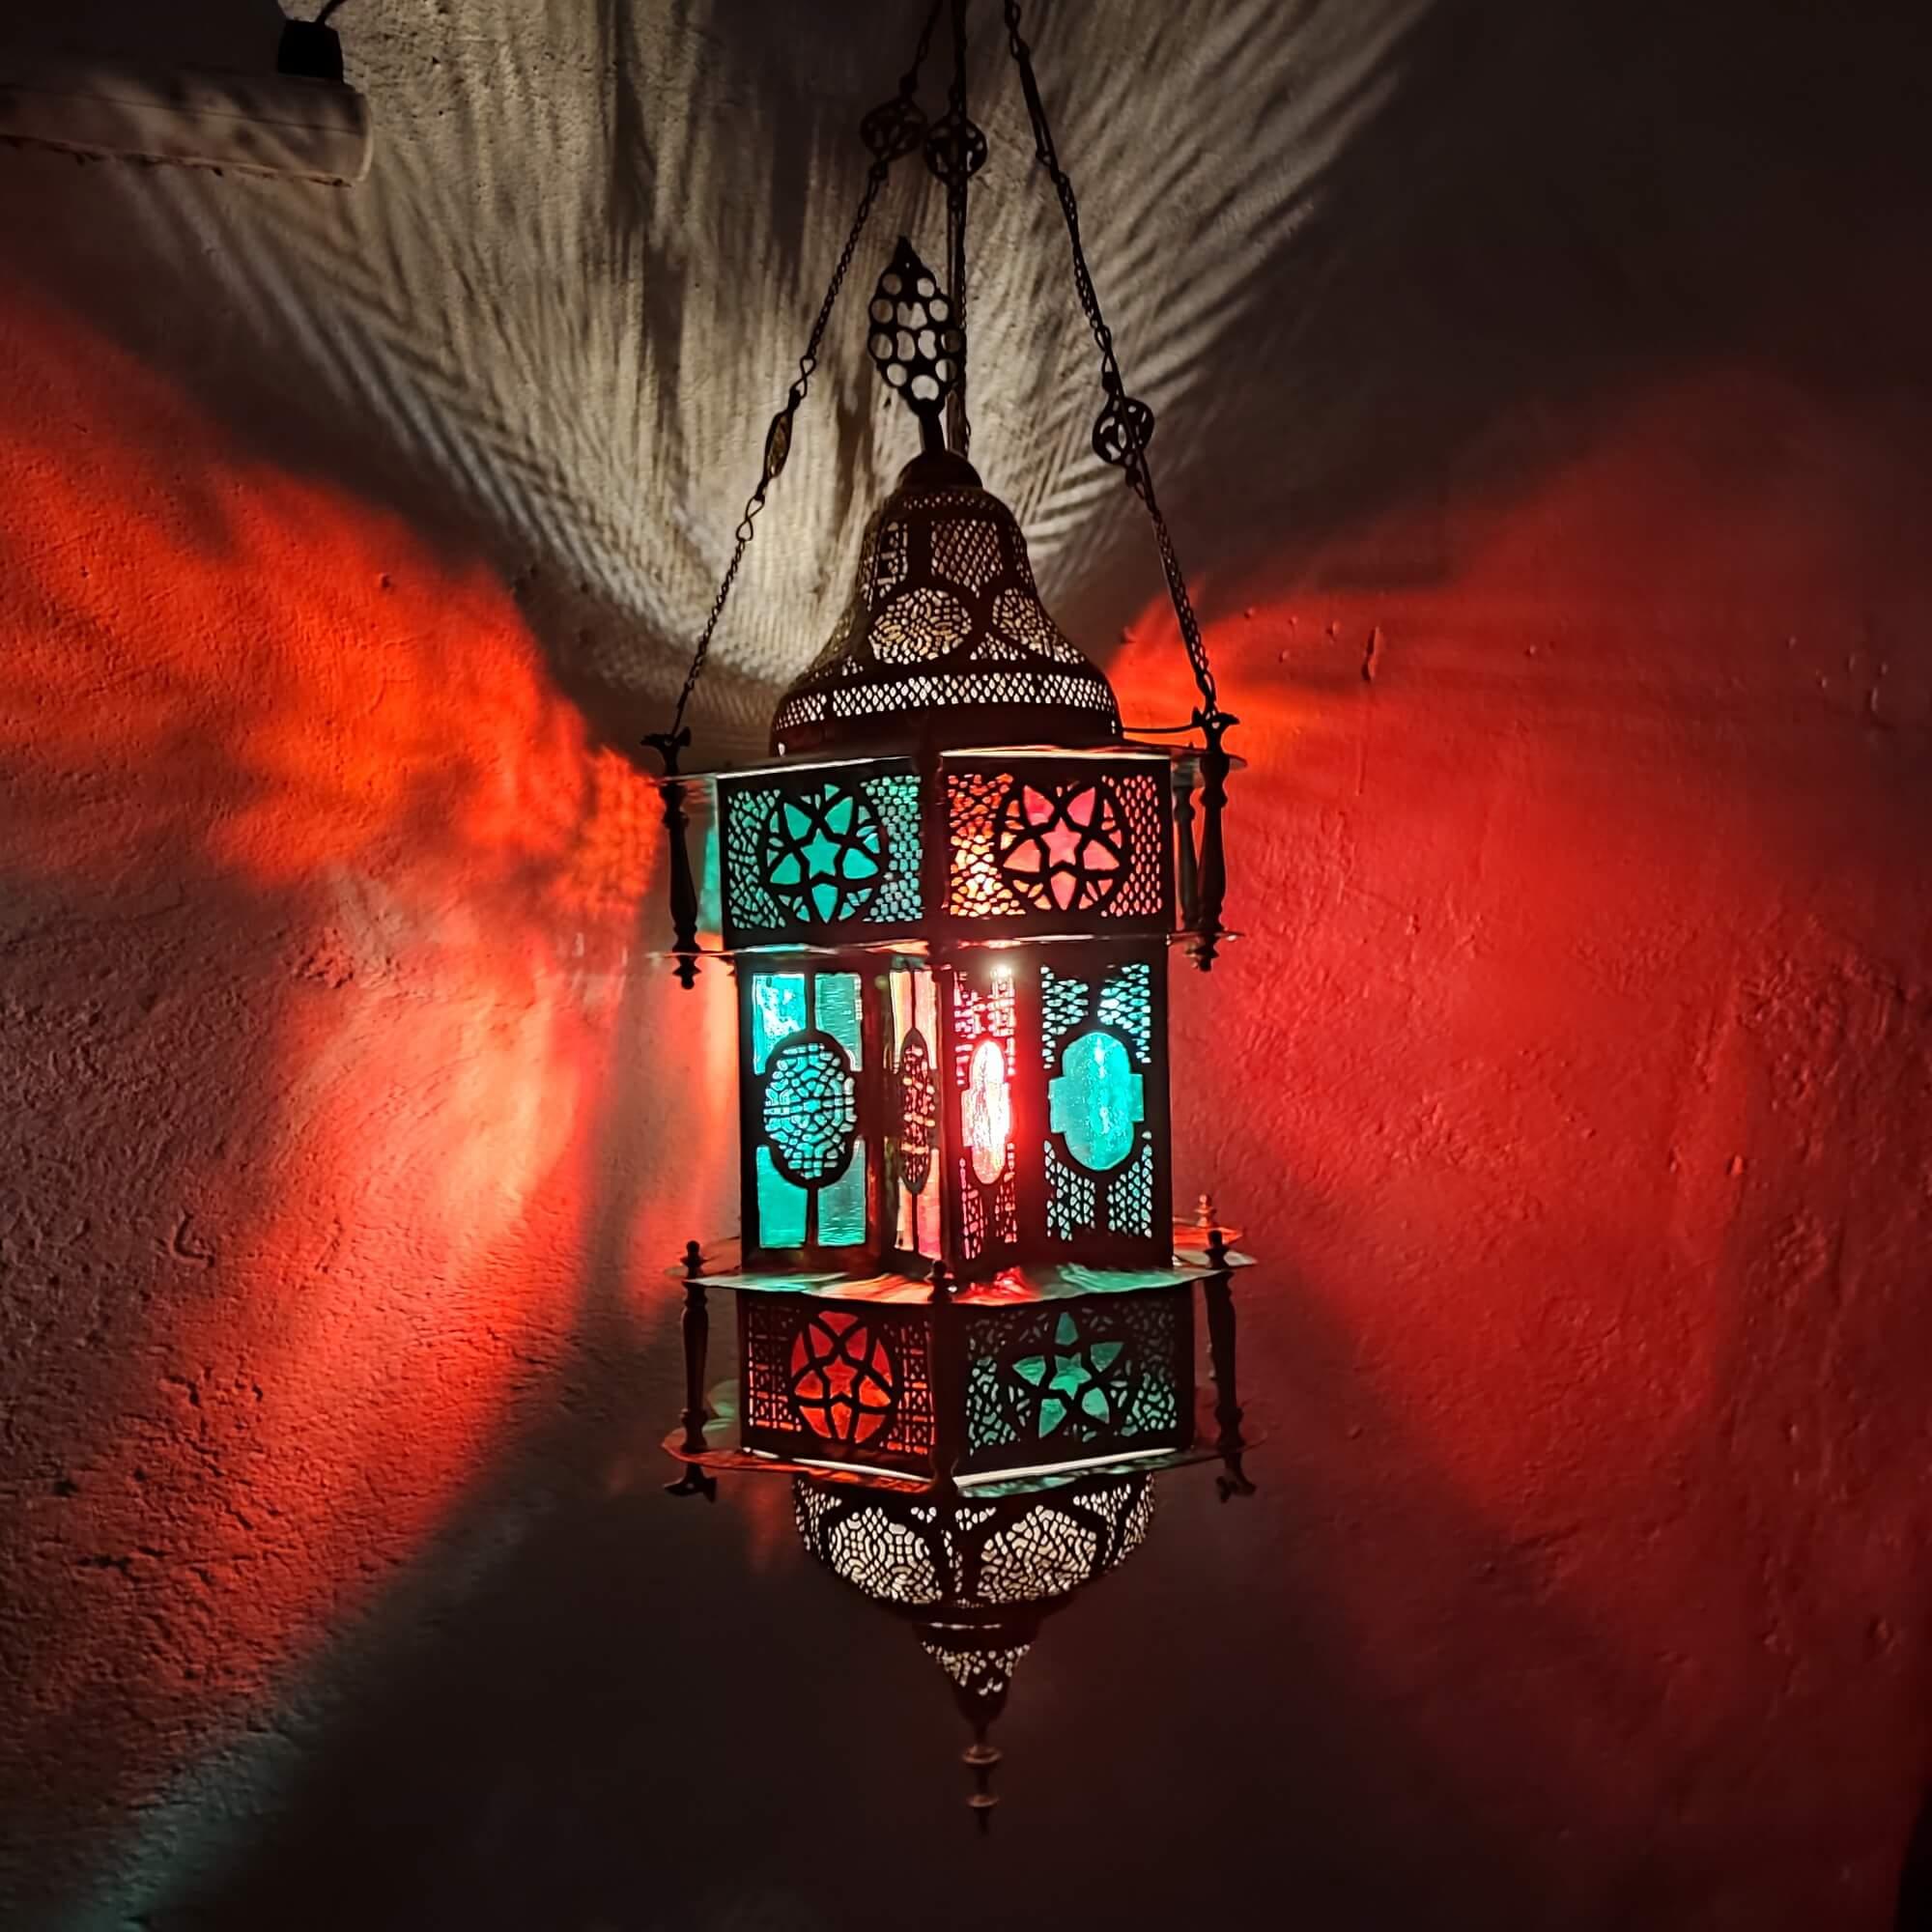 Vintage Moroccan pendant light. 
Newly rewired, and in very good condition with age appropriate patina. Original chains. Uses one single standard bulb E26/E27. Made of metal with cut-outs. Colored - red and teal green - glass inserts.